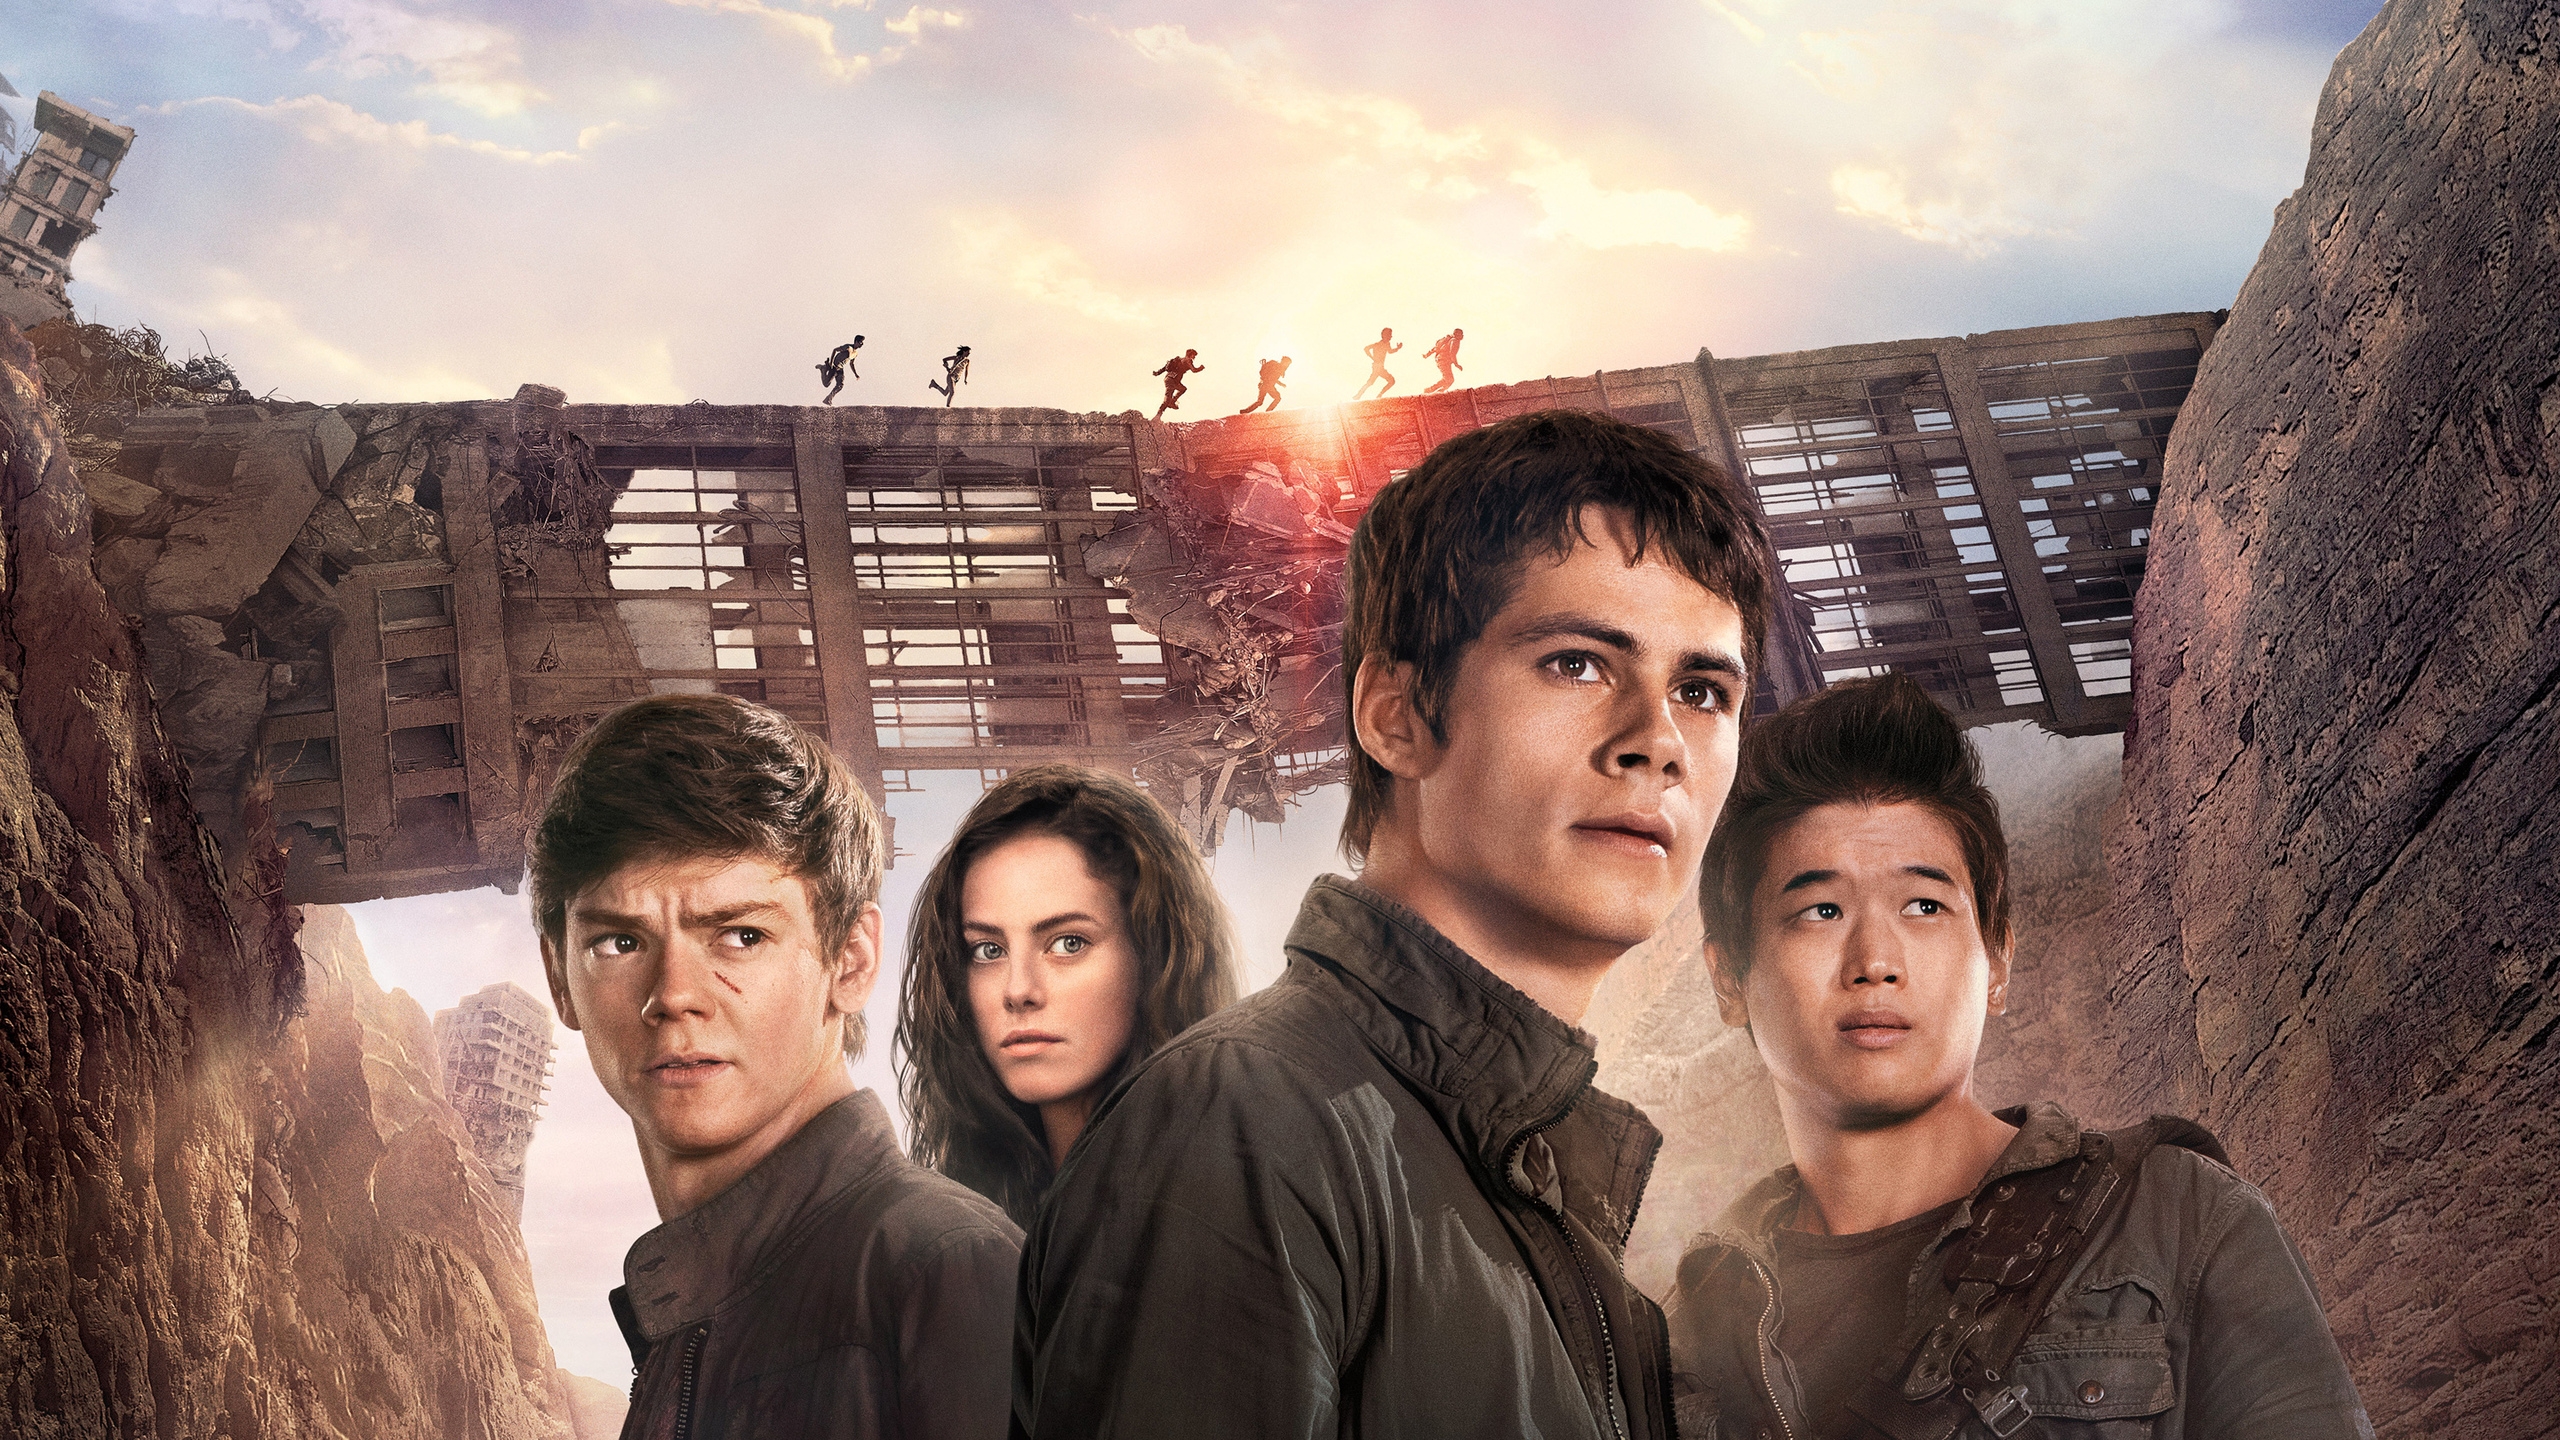 Maze Runner The Scorch Trials Poster for 2560x1440 HDTV resolution